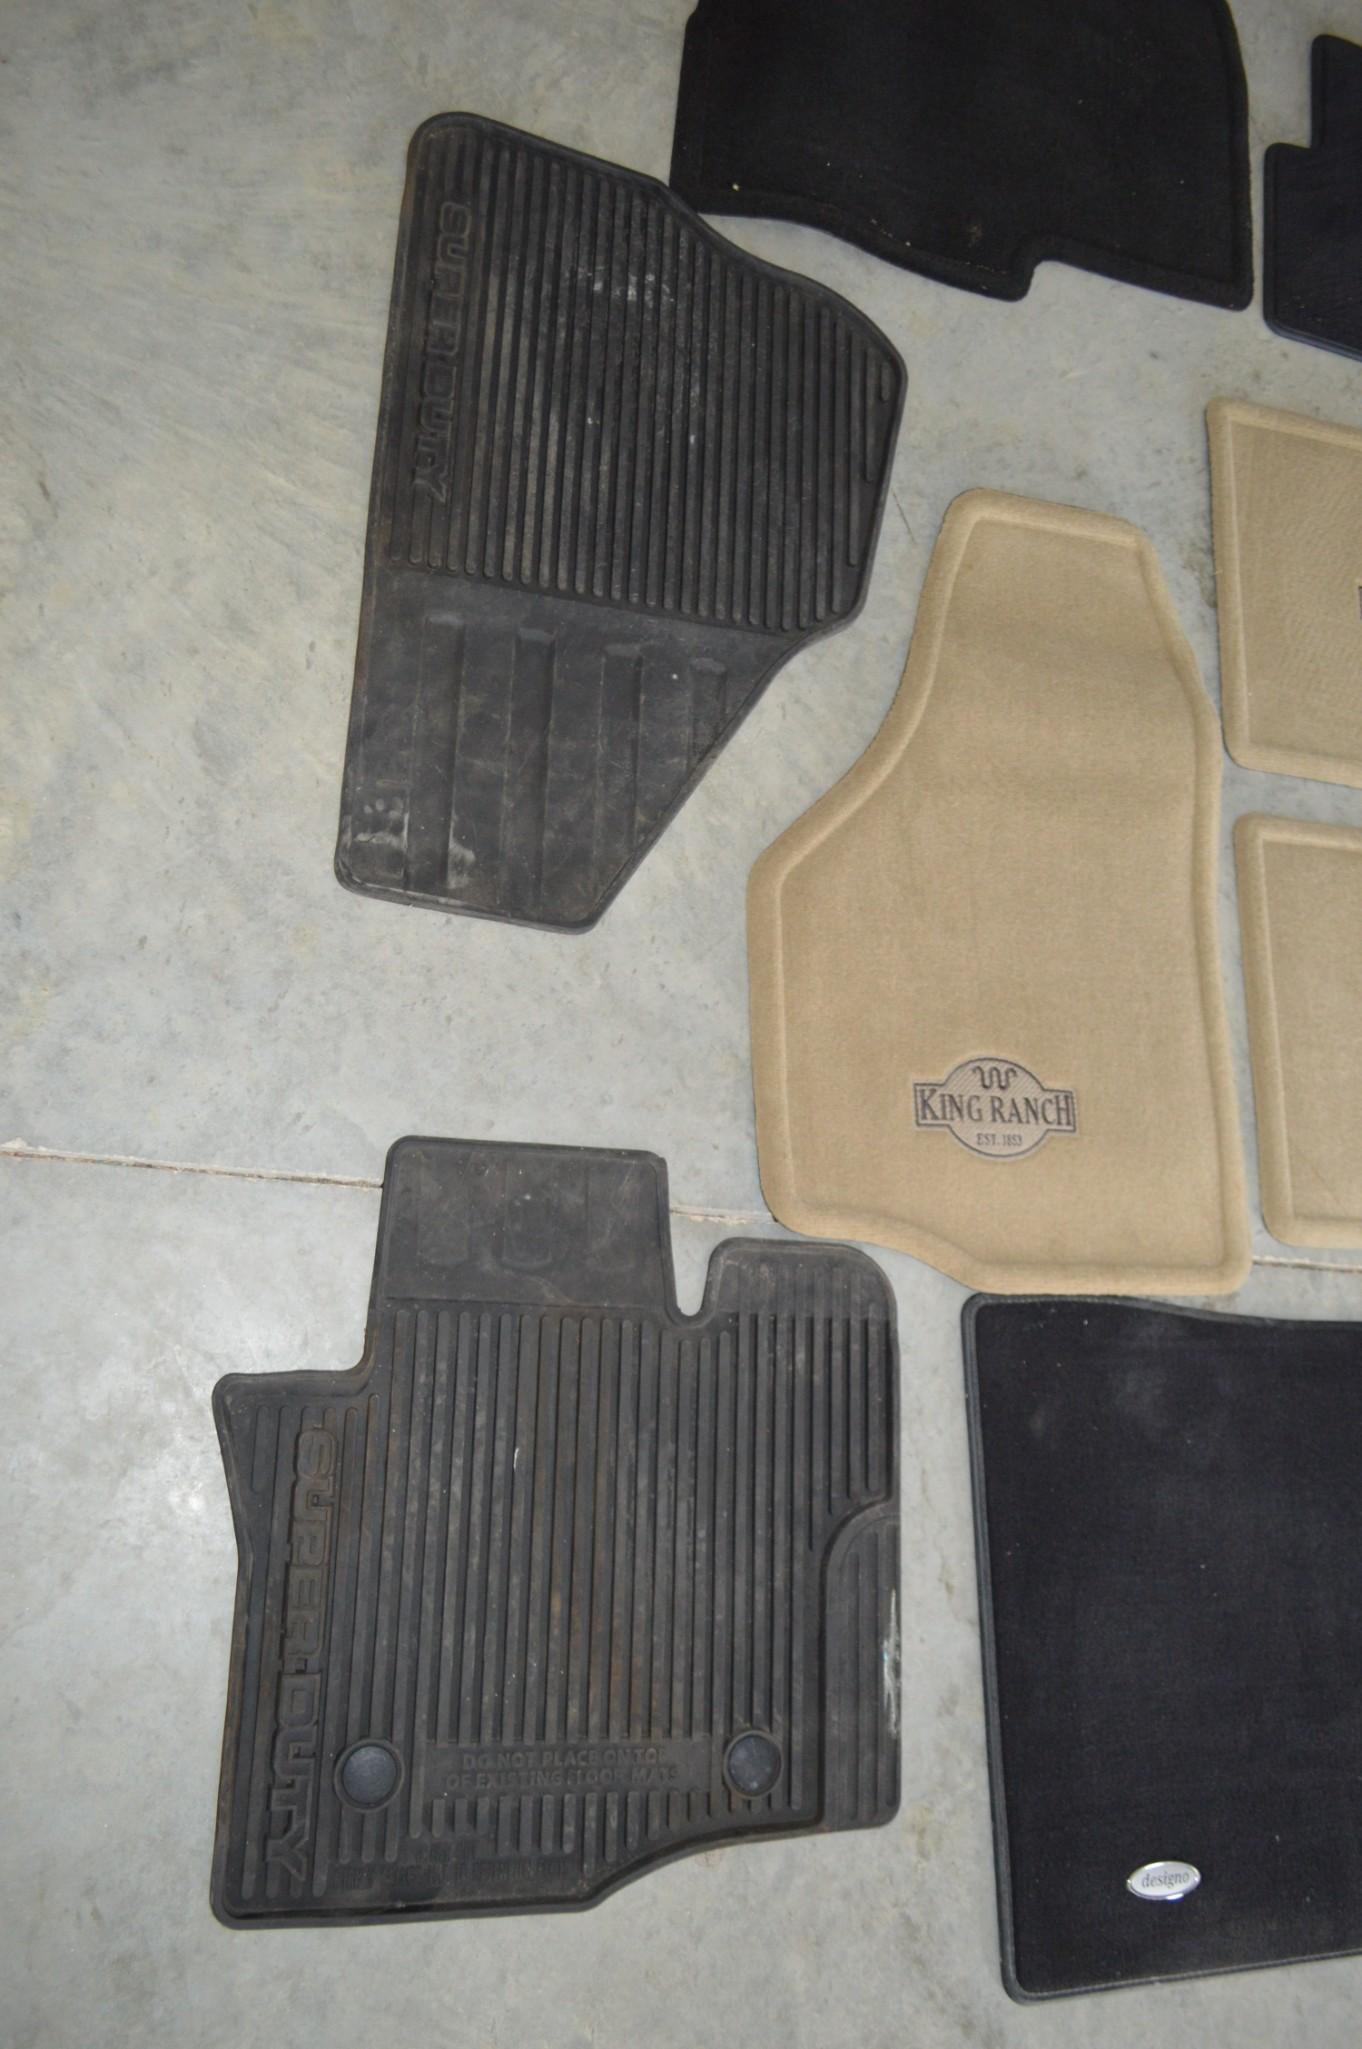 Set of 12 F150 Floor Mats & Mud Flaps - King Ranch Edition, Super Duty, WeatherTech and Stock